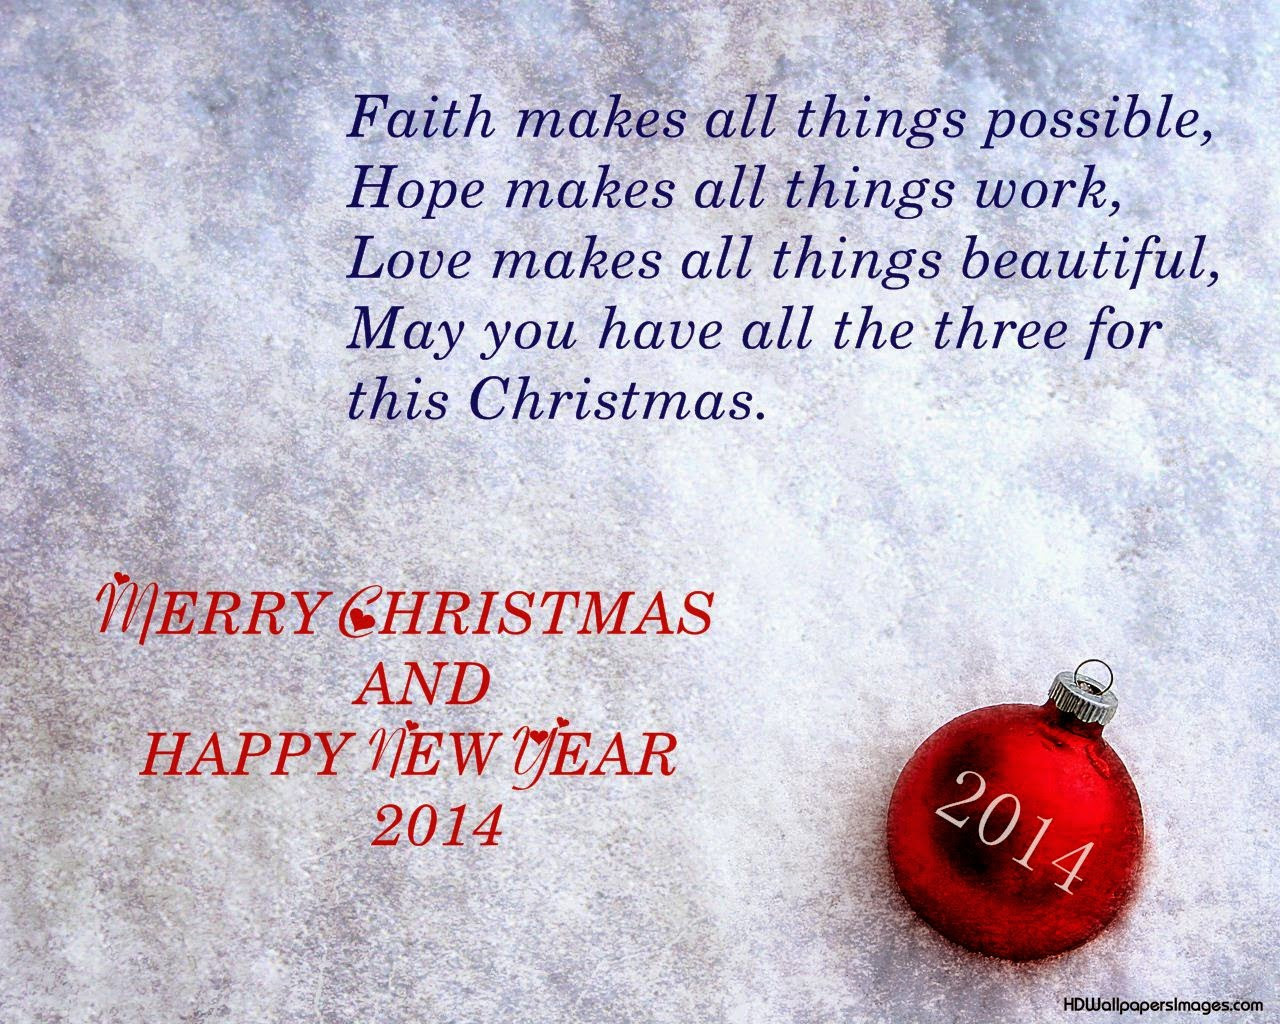 Merry Christmas Images And Quotes
 Merry Christmas Quotes QuotesGram